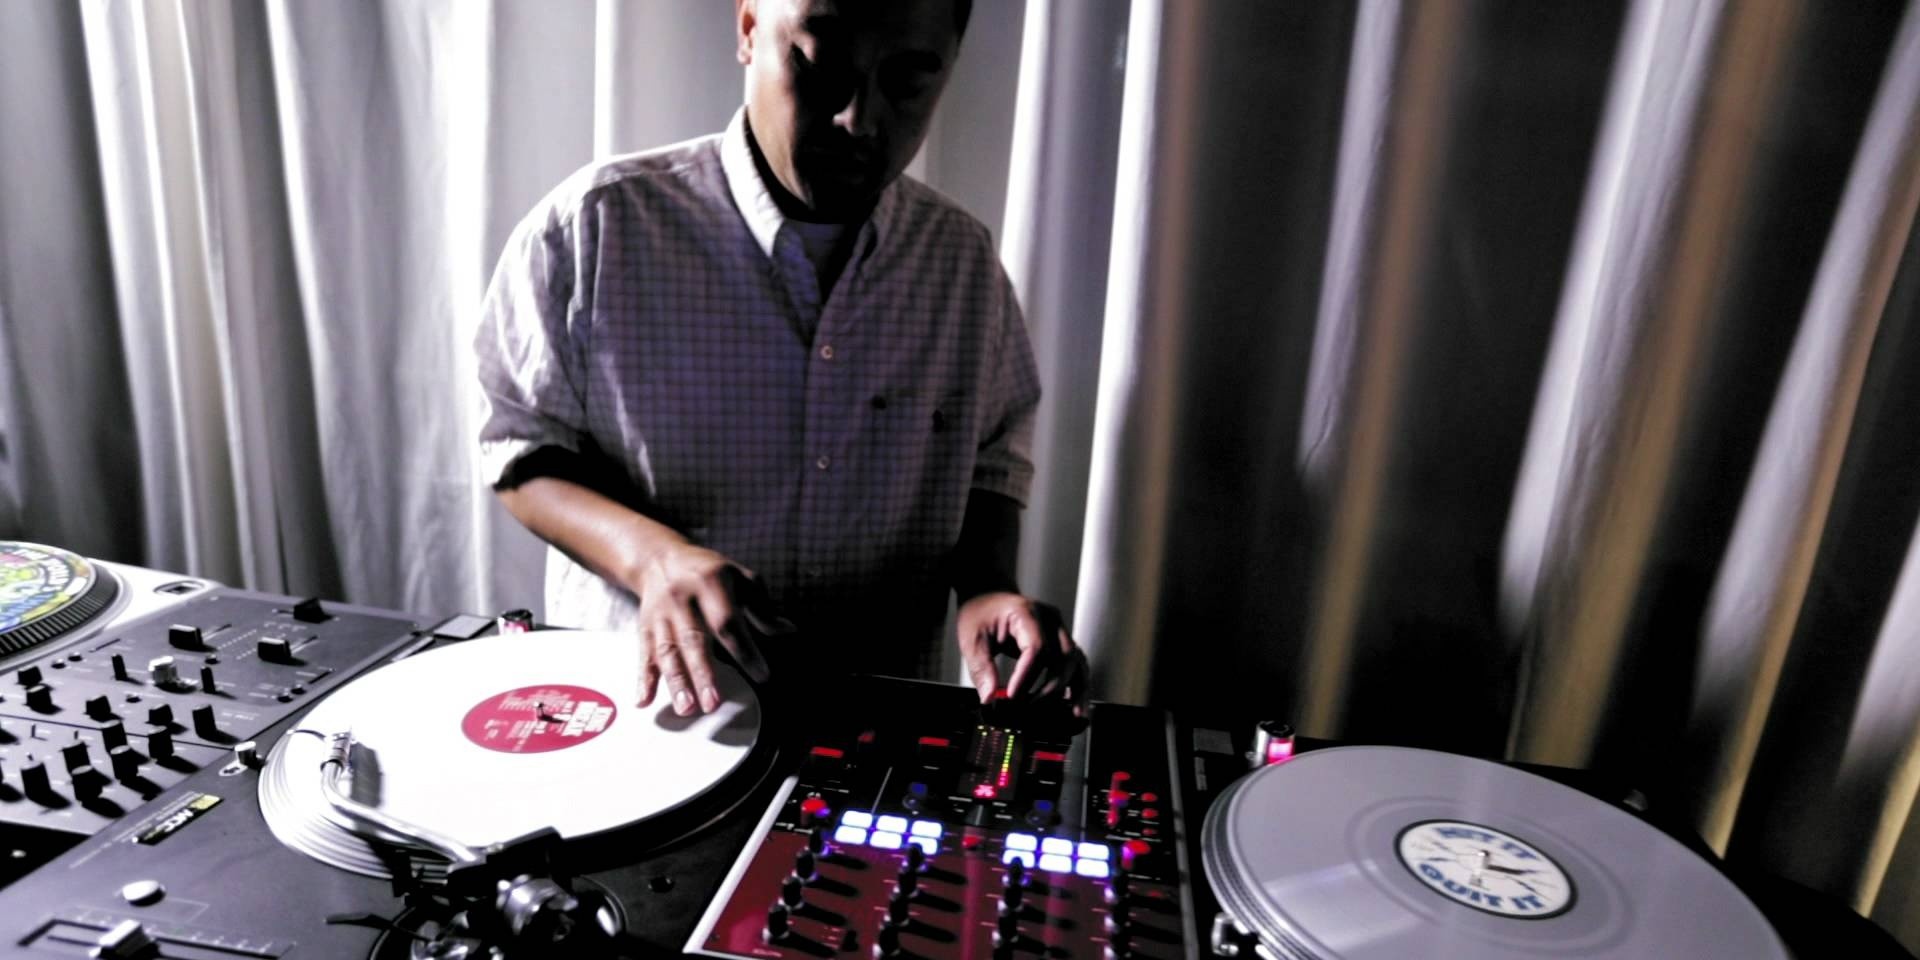 What should newbie DJs look for? We ask the experts